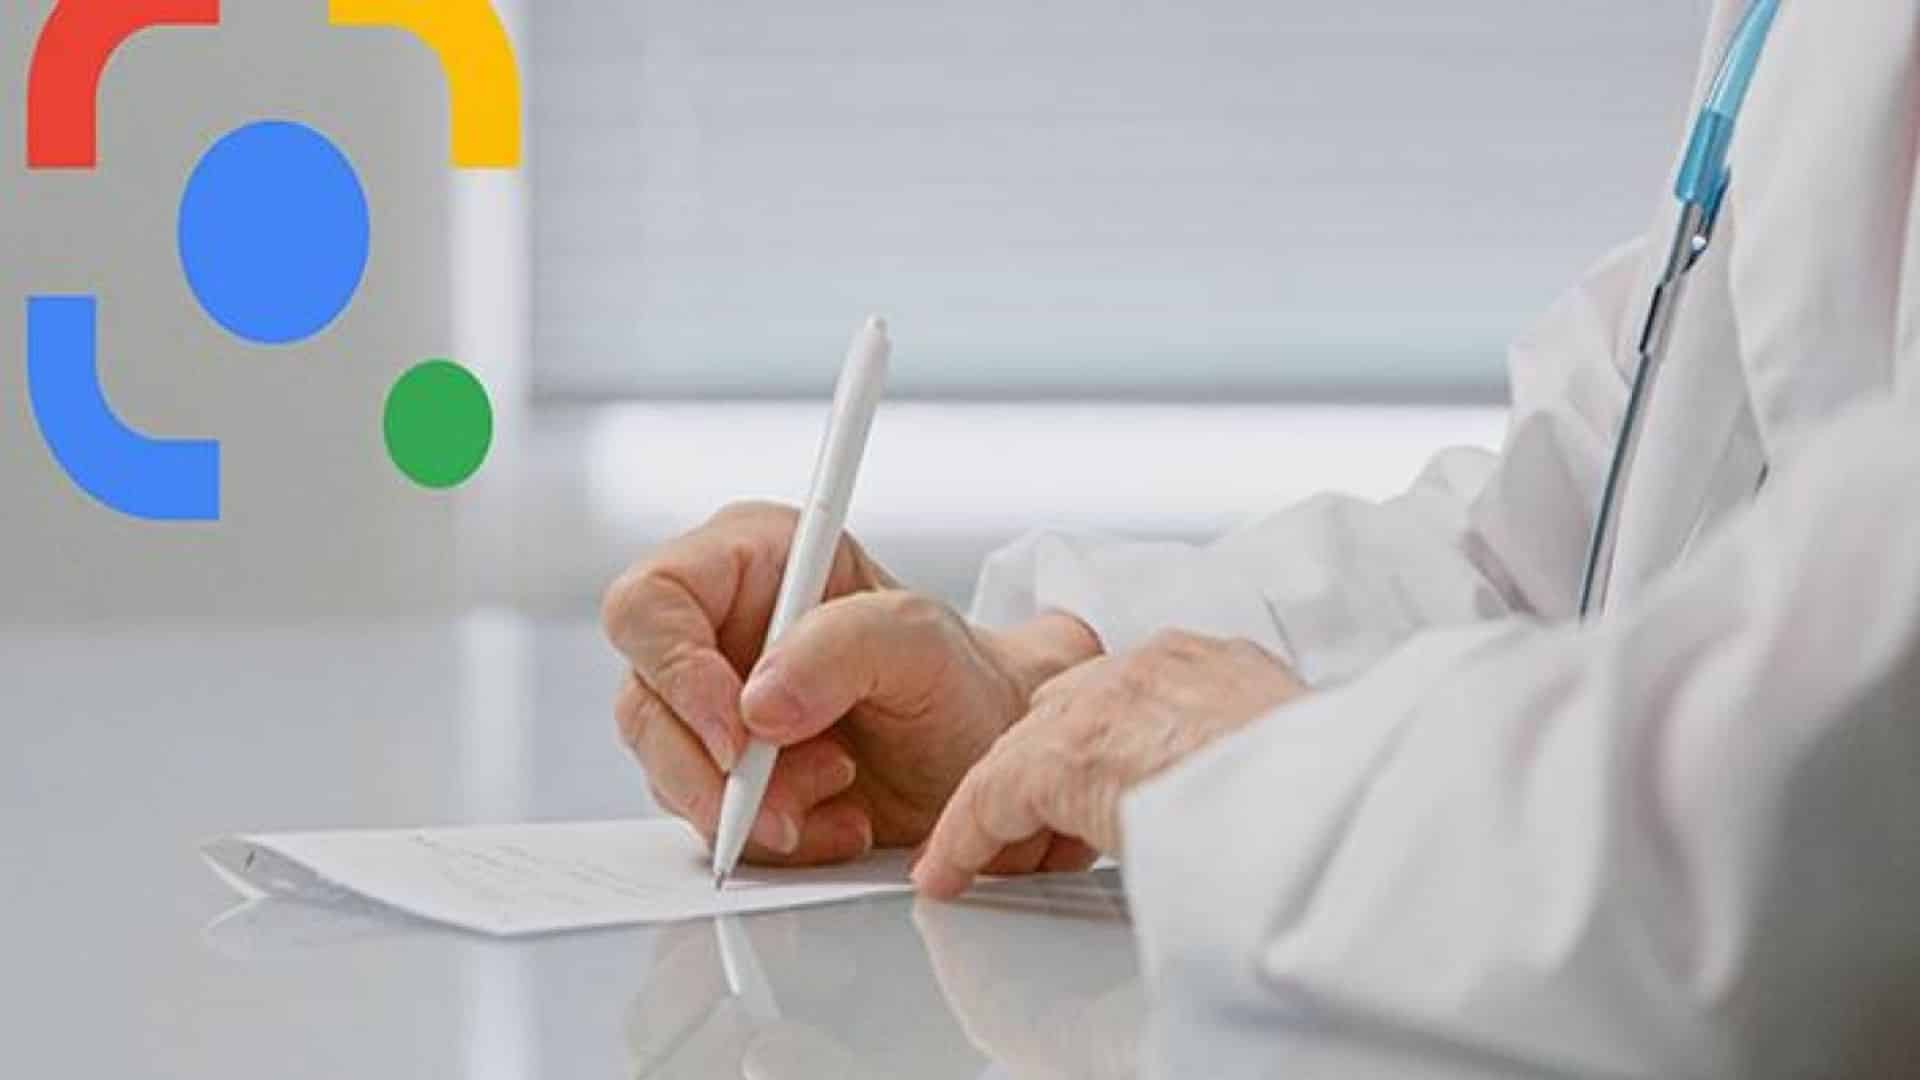 Google Lens Will Be Able To Decode Prescriptions From Doctors' Bad Handwriting